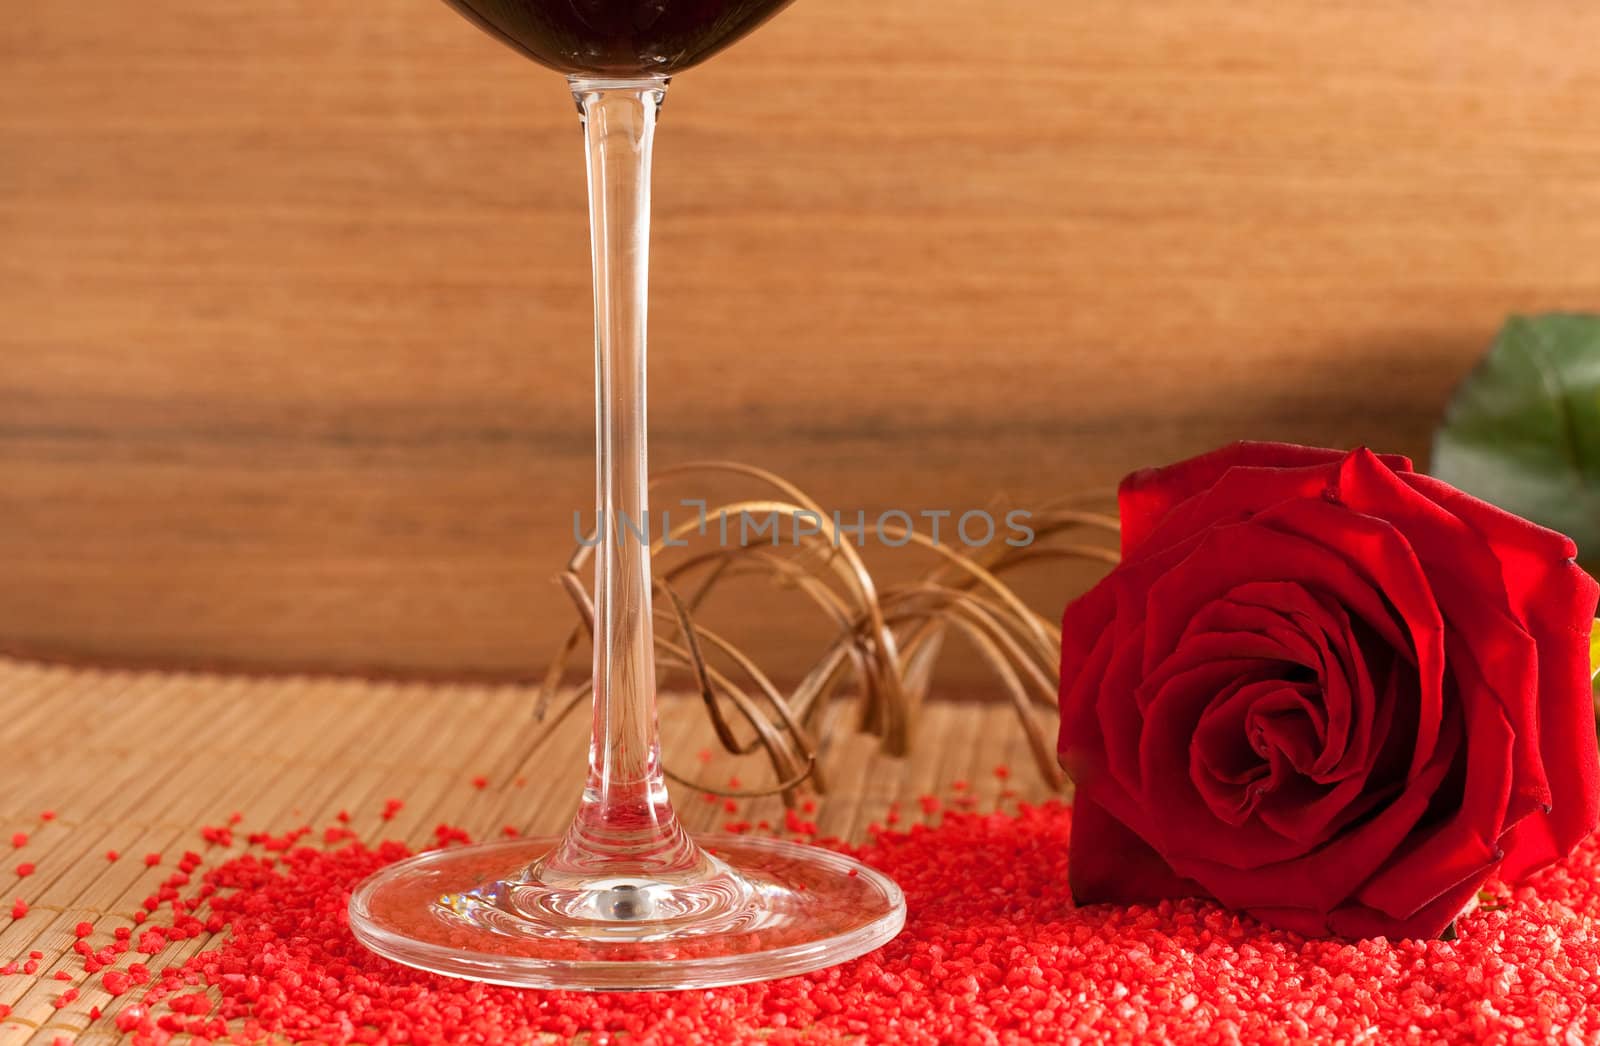 A red rose and a wine glass on a wooden bottom isolated on white background